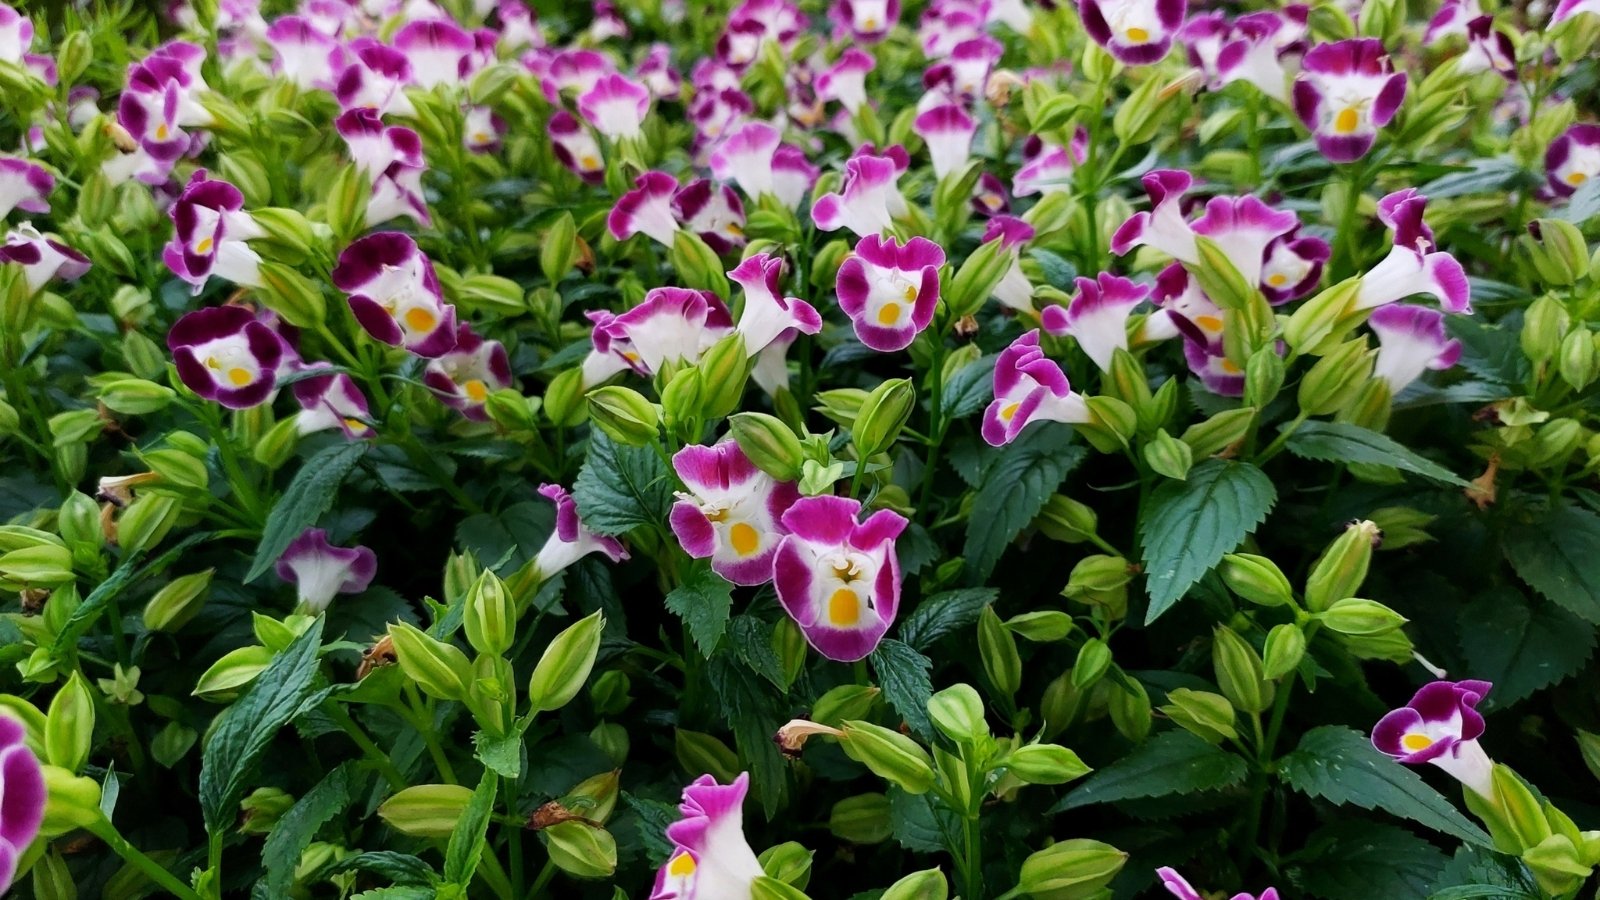 Torenia fournieri features trailing stems and toothed, lance-shaped leaves, adorned with trumpet-shaped flowers in shades of purple with contrasting markings.
